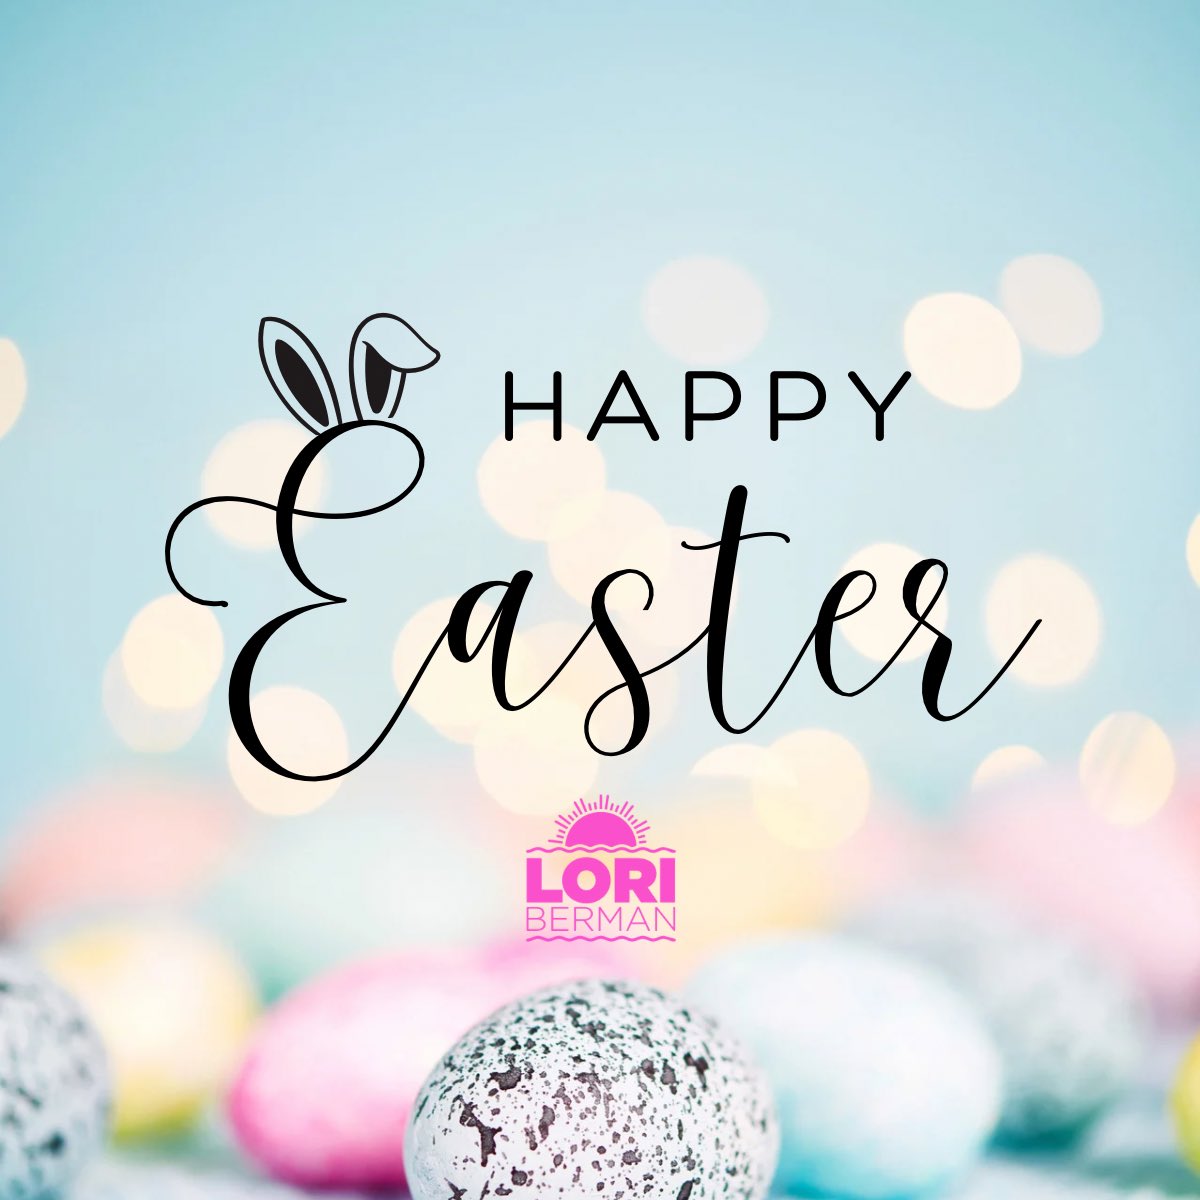 Easter’s message of renewal and redemption is truly universal. May those celebrating feel the warmth of community and the comfort of their faith on this special day! #HappyEaster